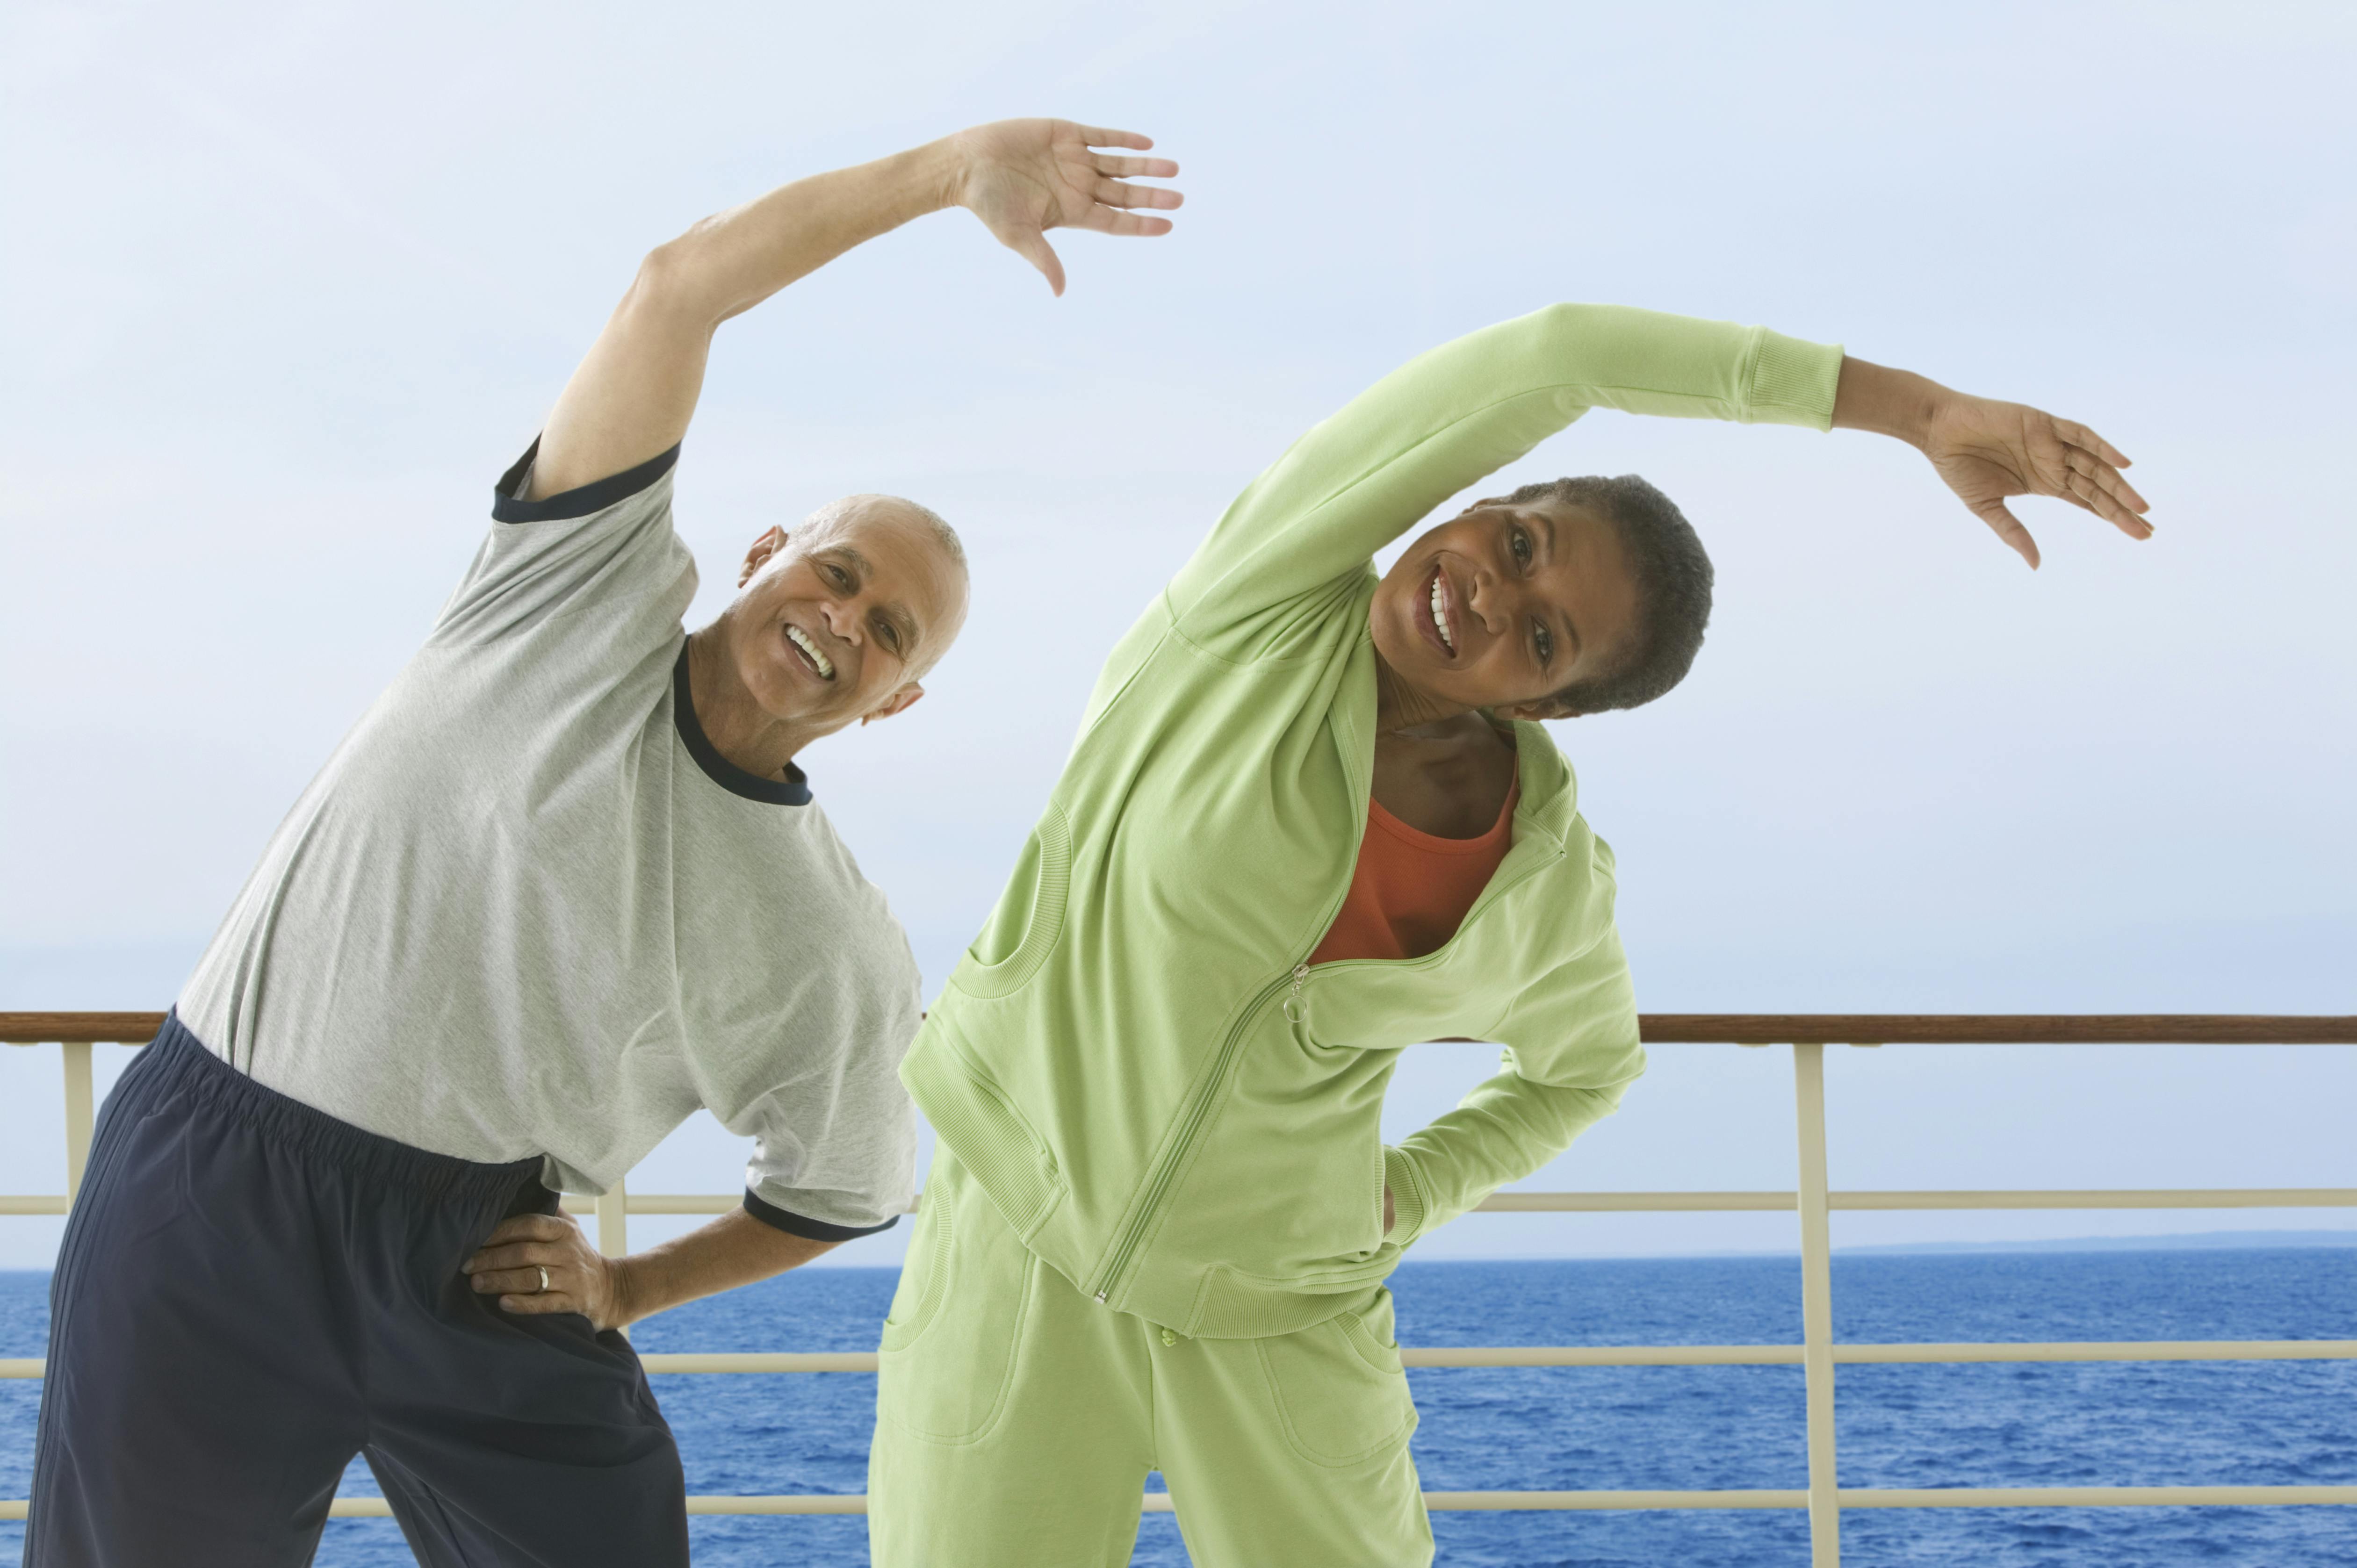 There are activities for all fitness levels on every cruise.